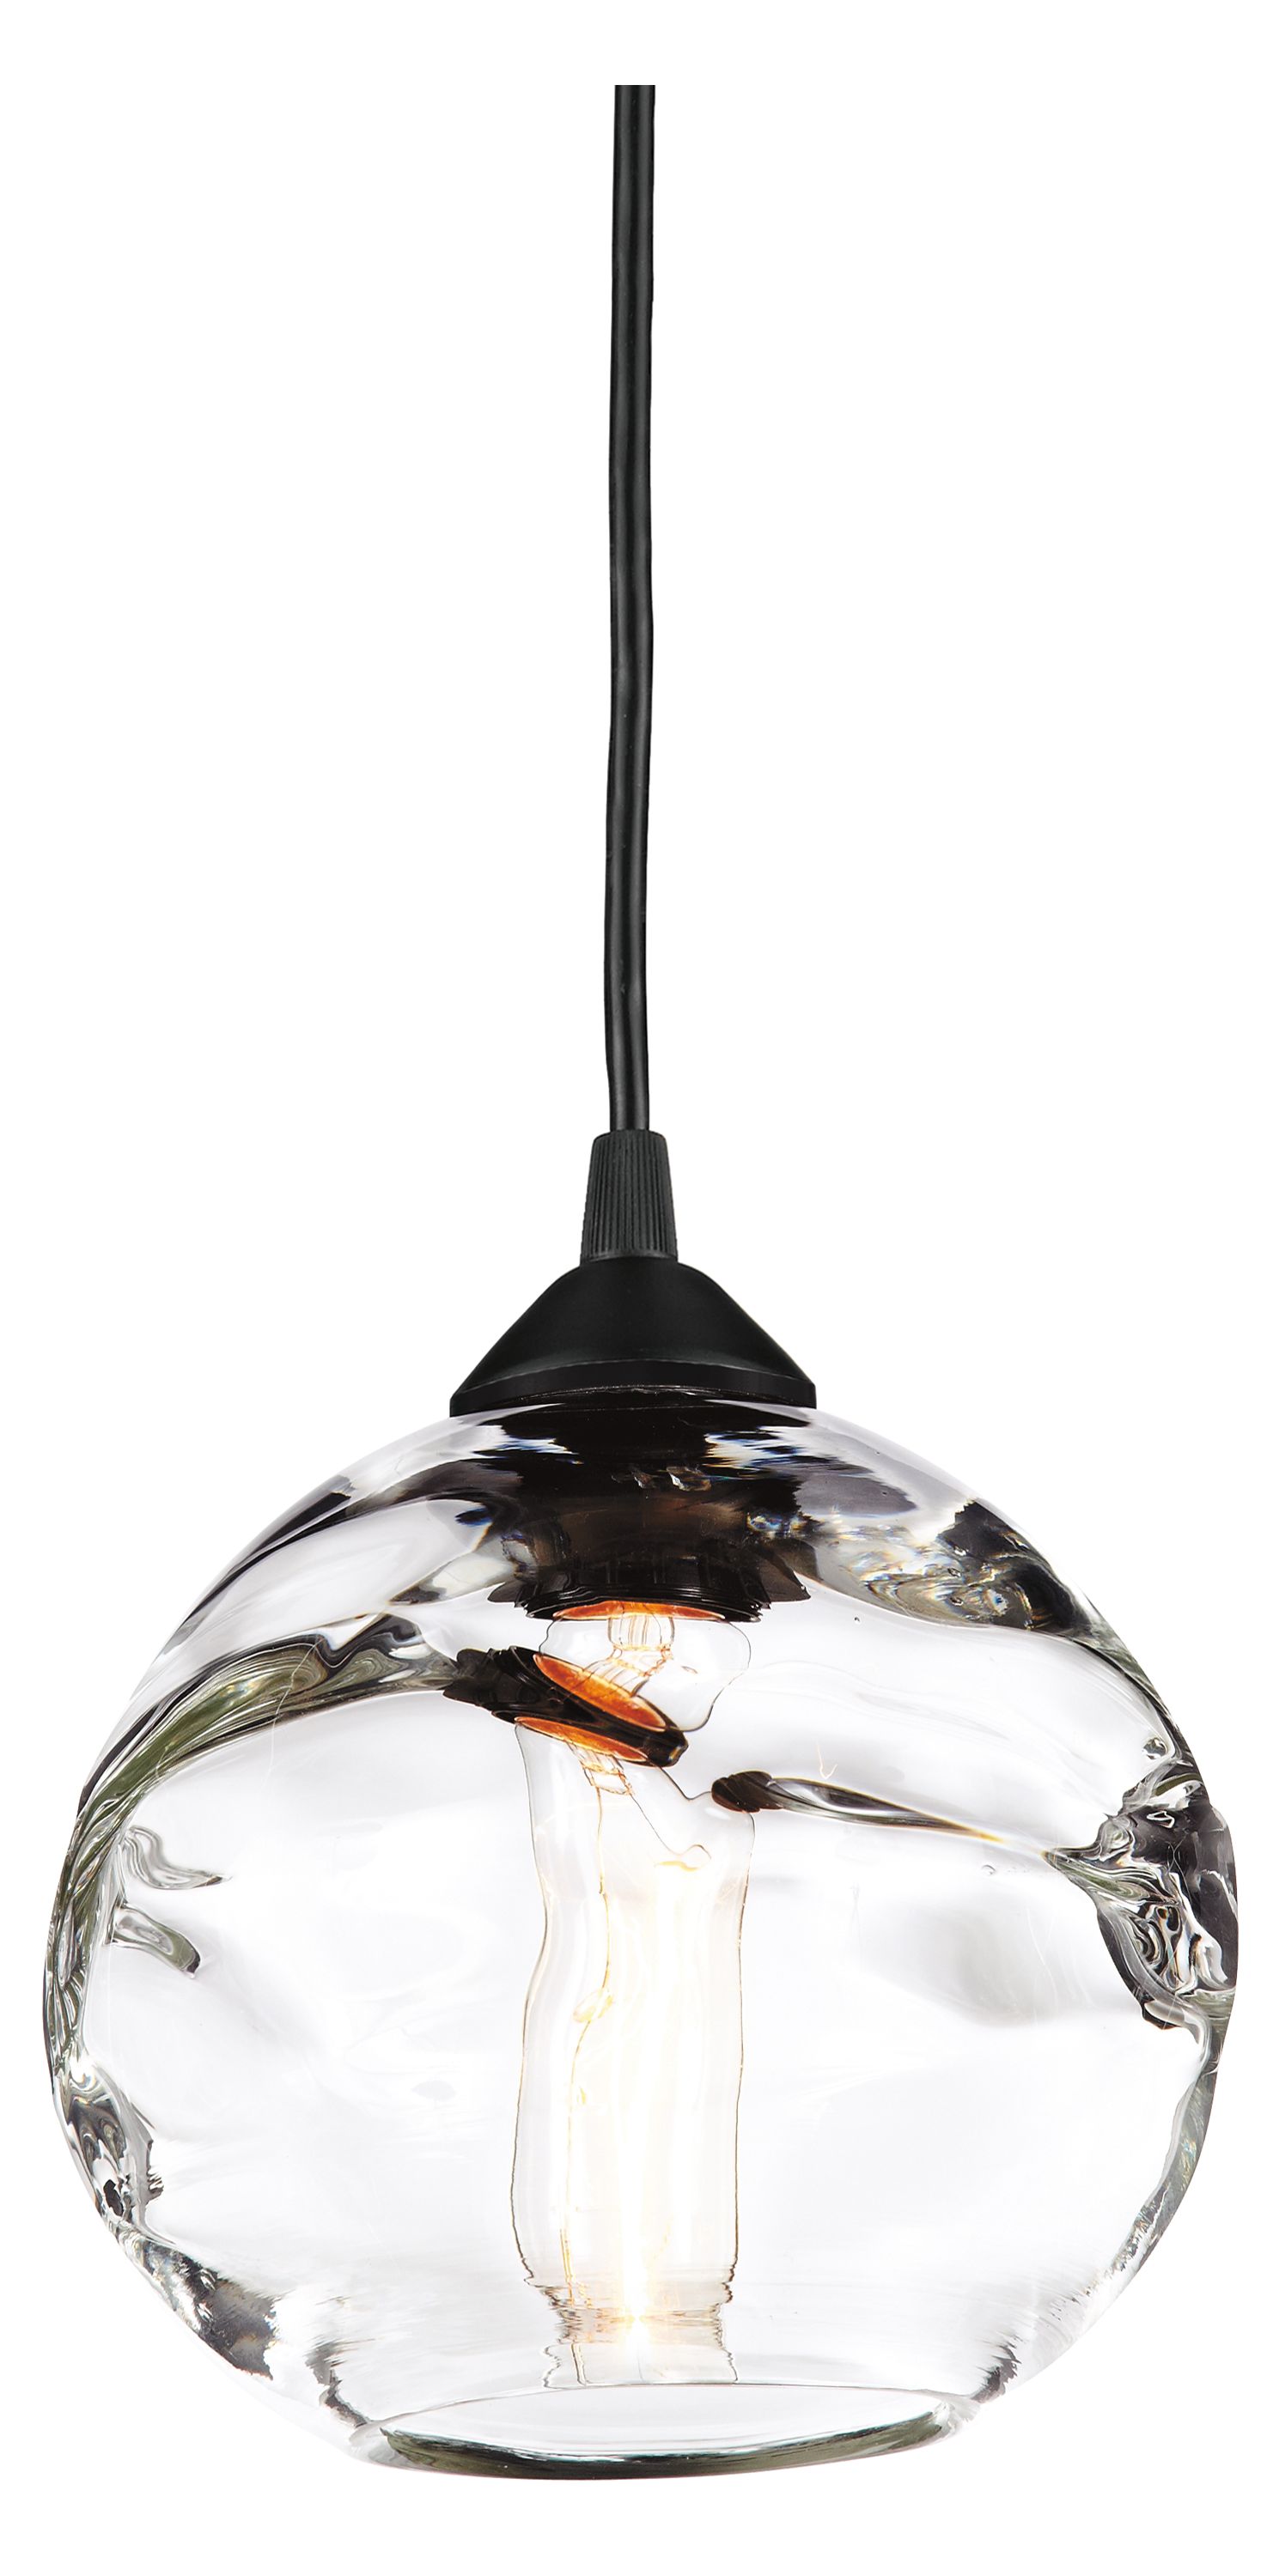 ByEve - Mouth-blown glass lighting